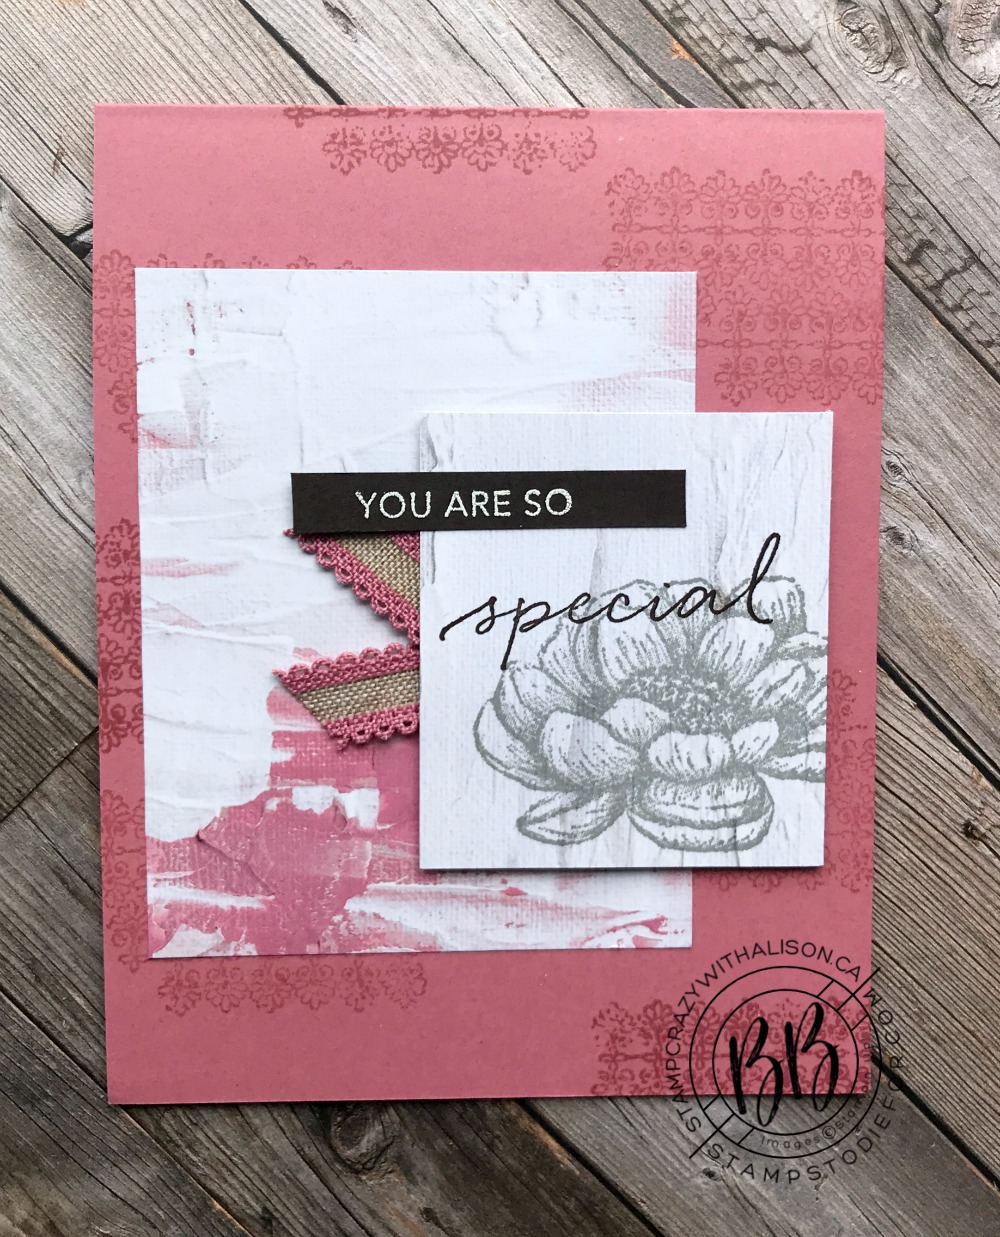 Sunday Sketches with the Tasteful Touches Stamp Set from Stampin’ Up!®